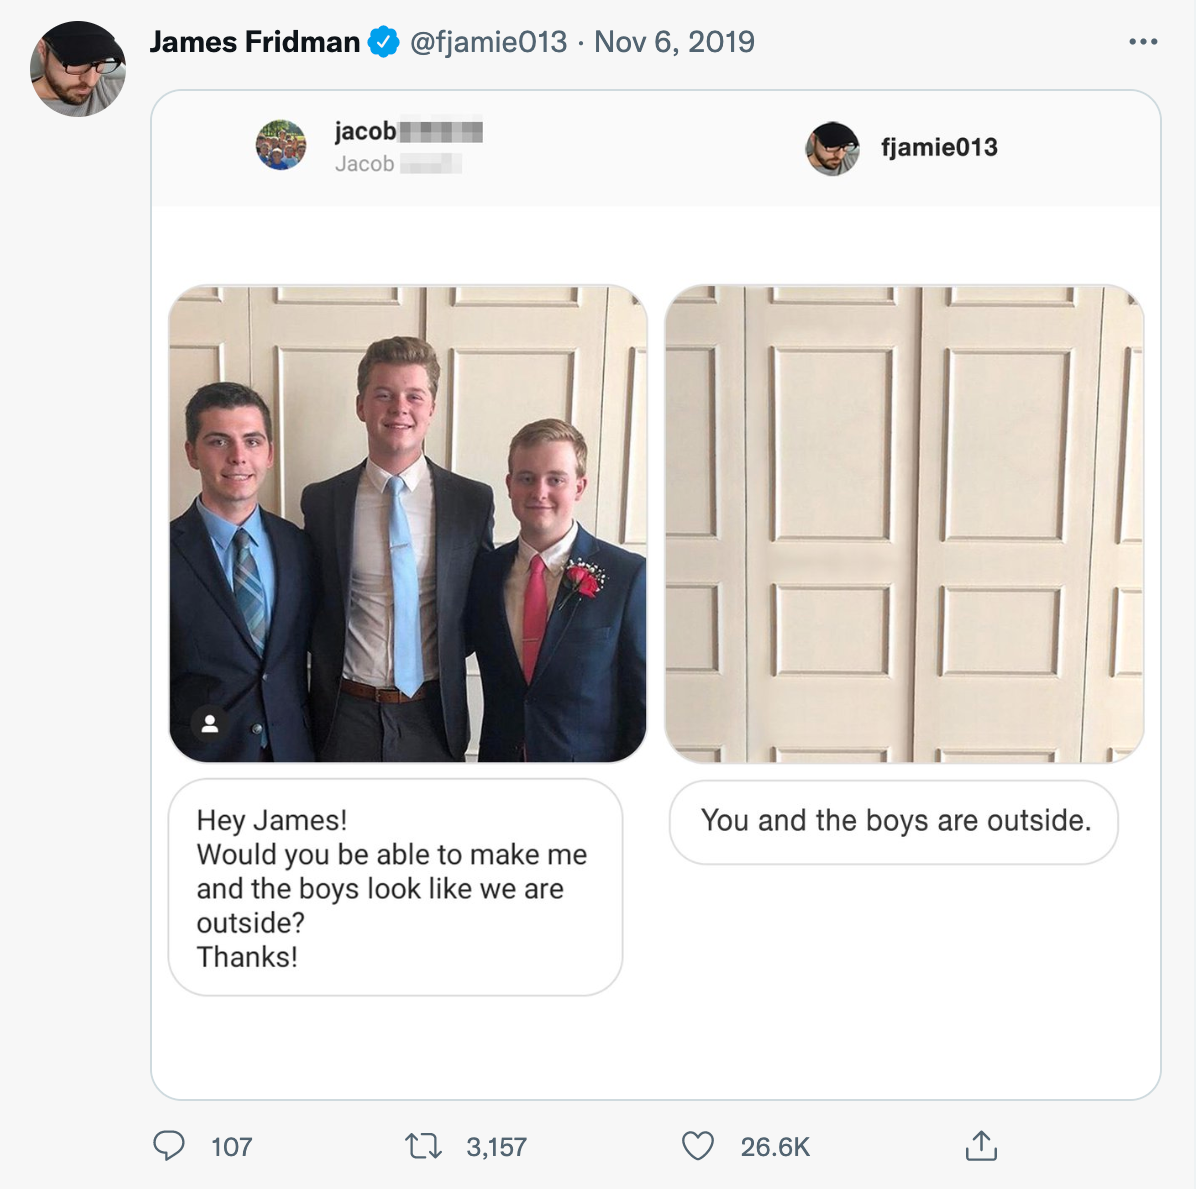 wholesome photoshop edits - james fridman - James Fridman jacob Jacob 107 . Hey James! Would you be able to make me and the boys look we are outside? Thanks! 13,157 fjamie013 You and the boys are outside. ...